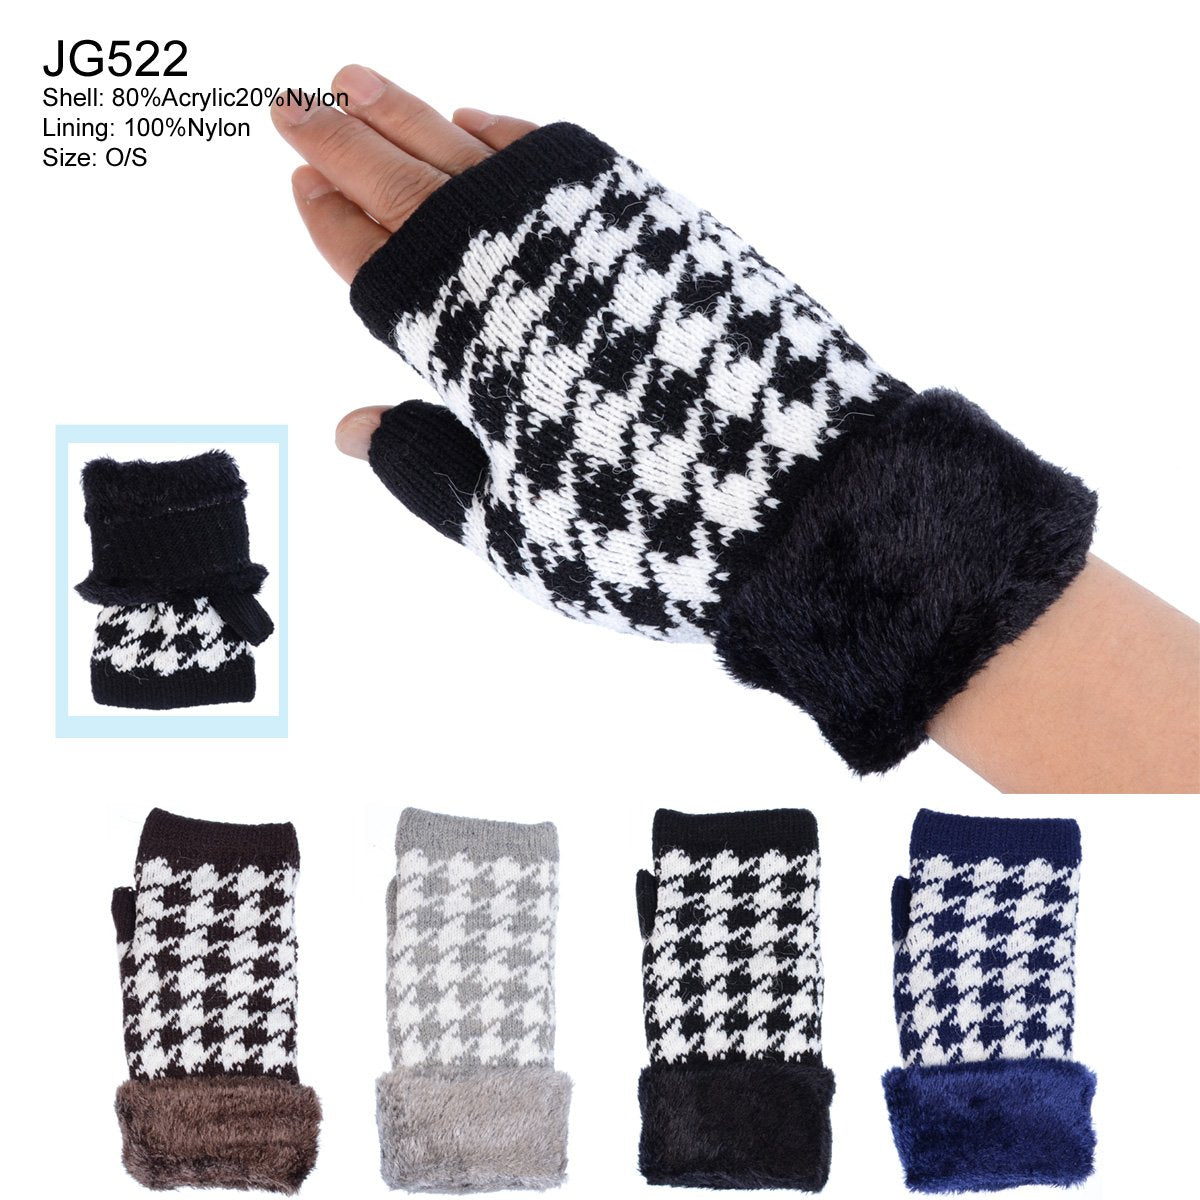 Houndstooth Pattern Knitted Fingerless Gloves W/ Cuffs & Chenille Lining - 12Pc Set